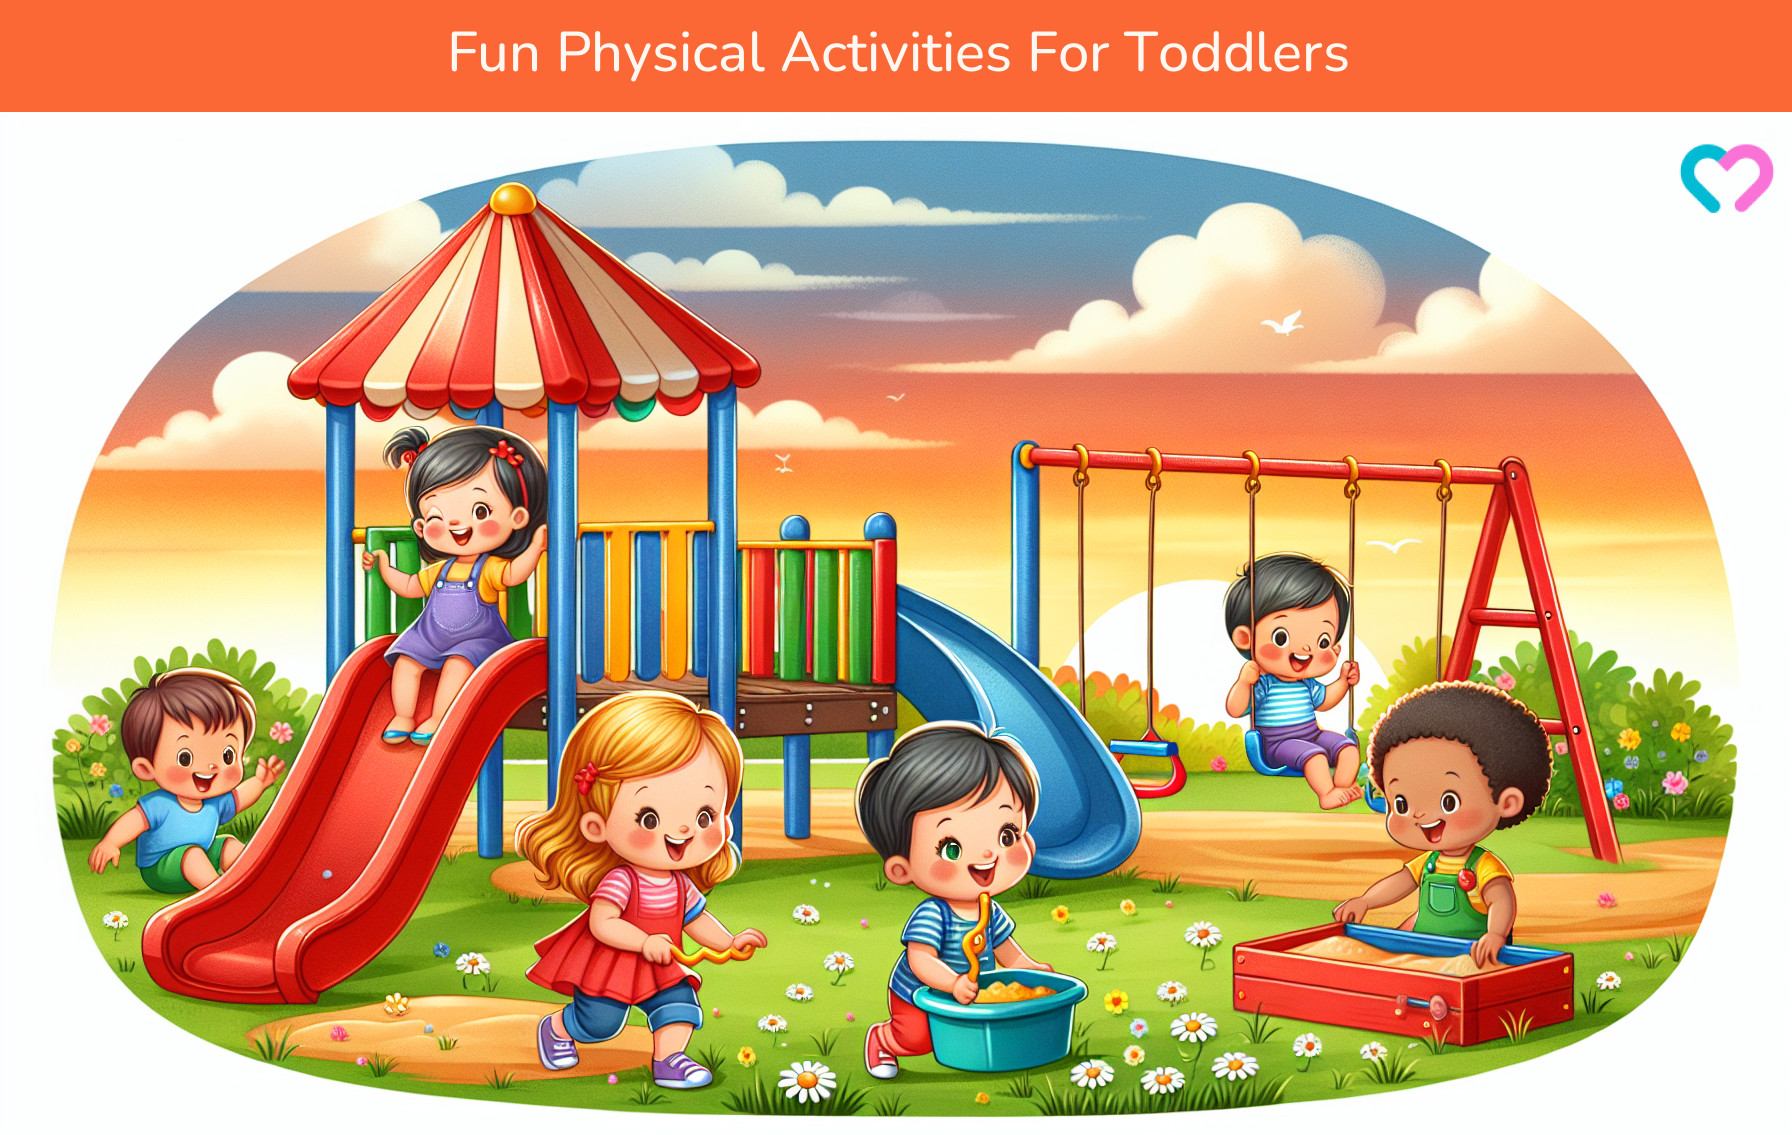 Physical Activities For Toddlers_illustration